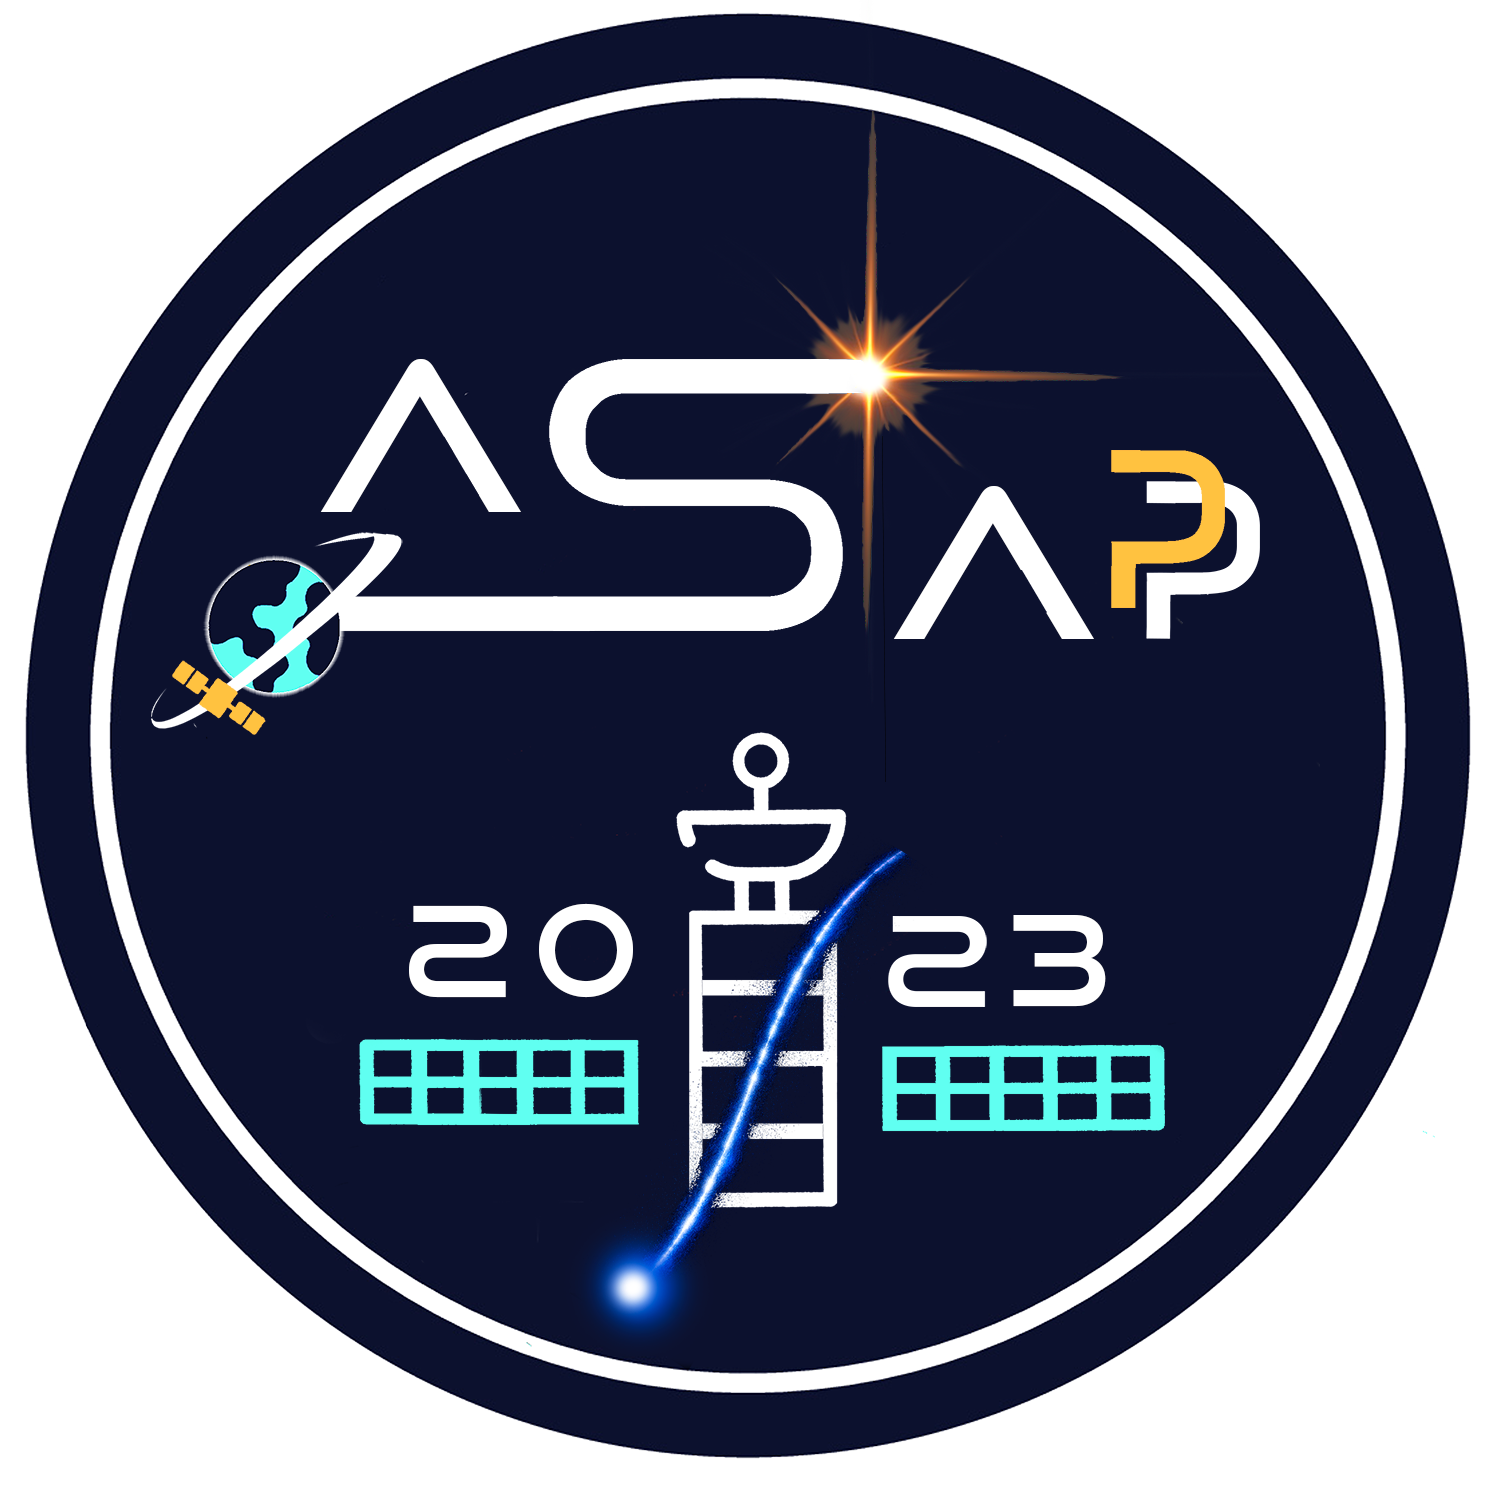 ASAPP 2023 - Advances in Space AstroParticle Physics: frontier technologies for particle measurements in space